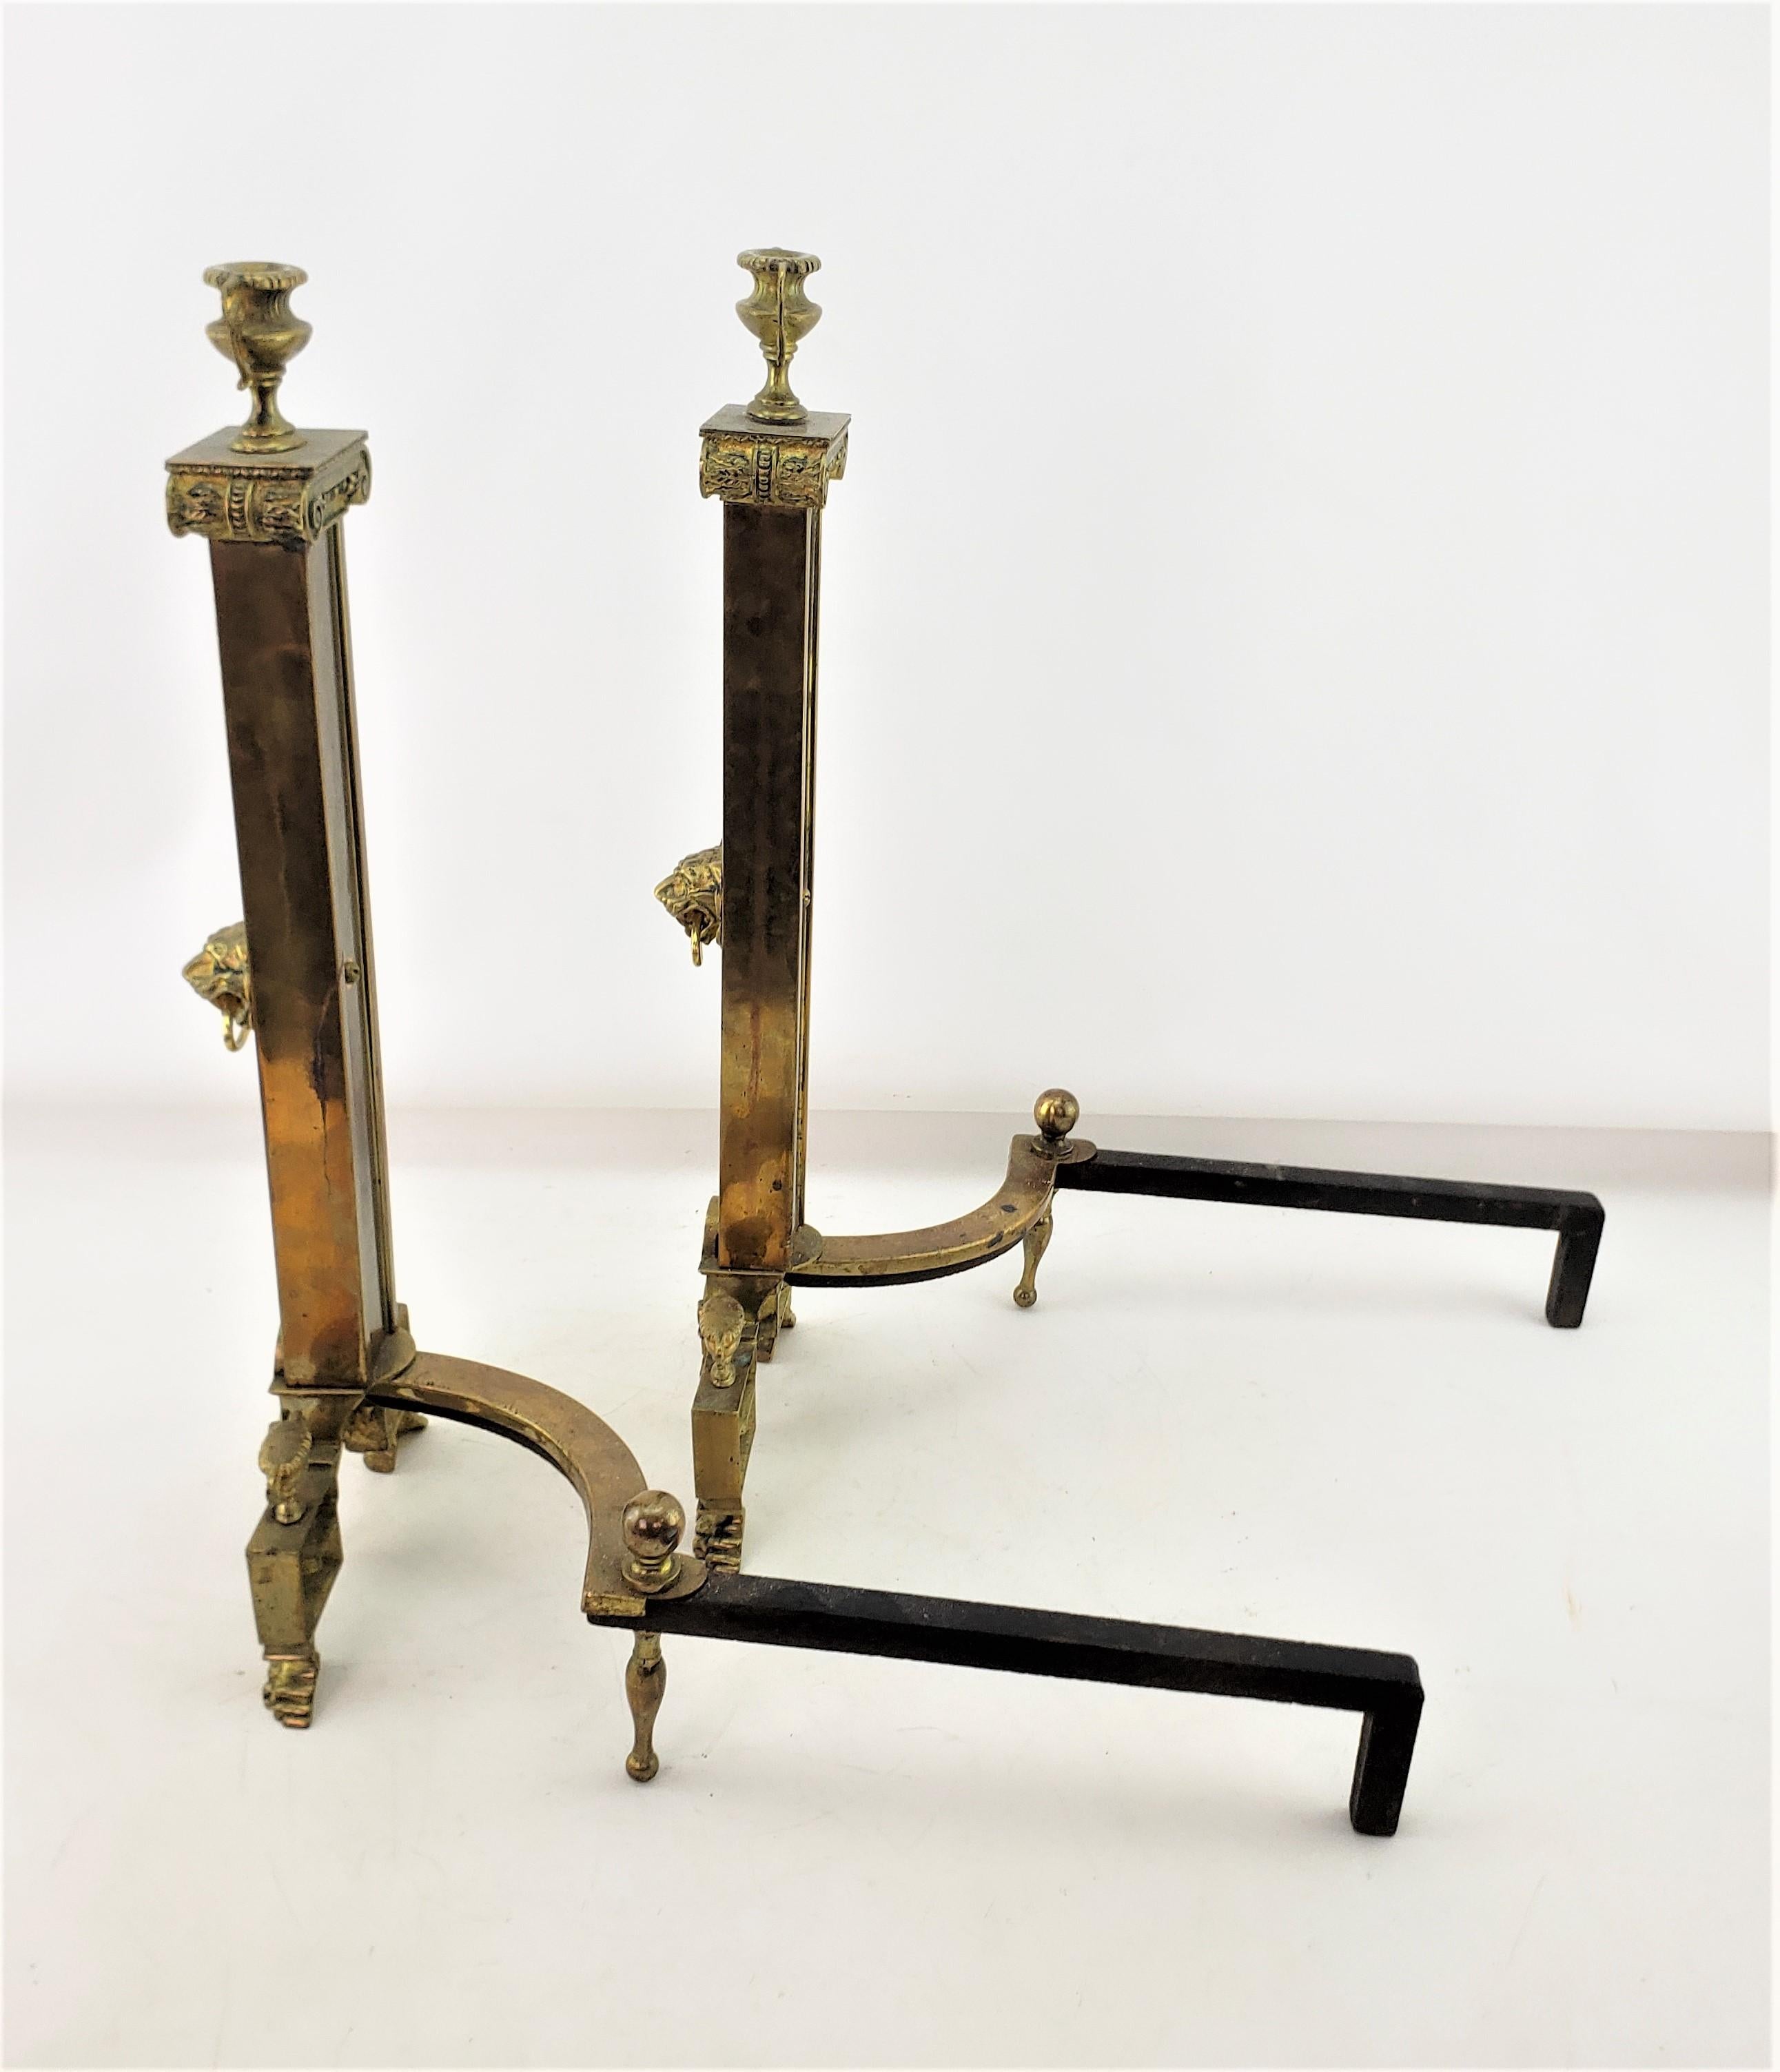 Antique Neoclassical Styled Andirons with Brass Urns & Lion Head Accents For Sale 2